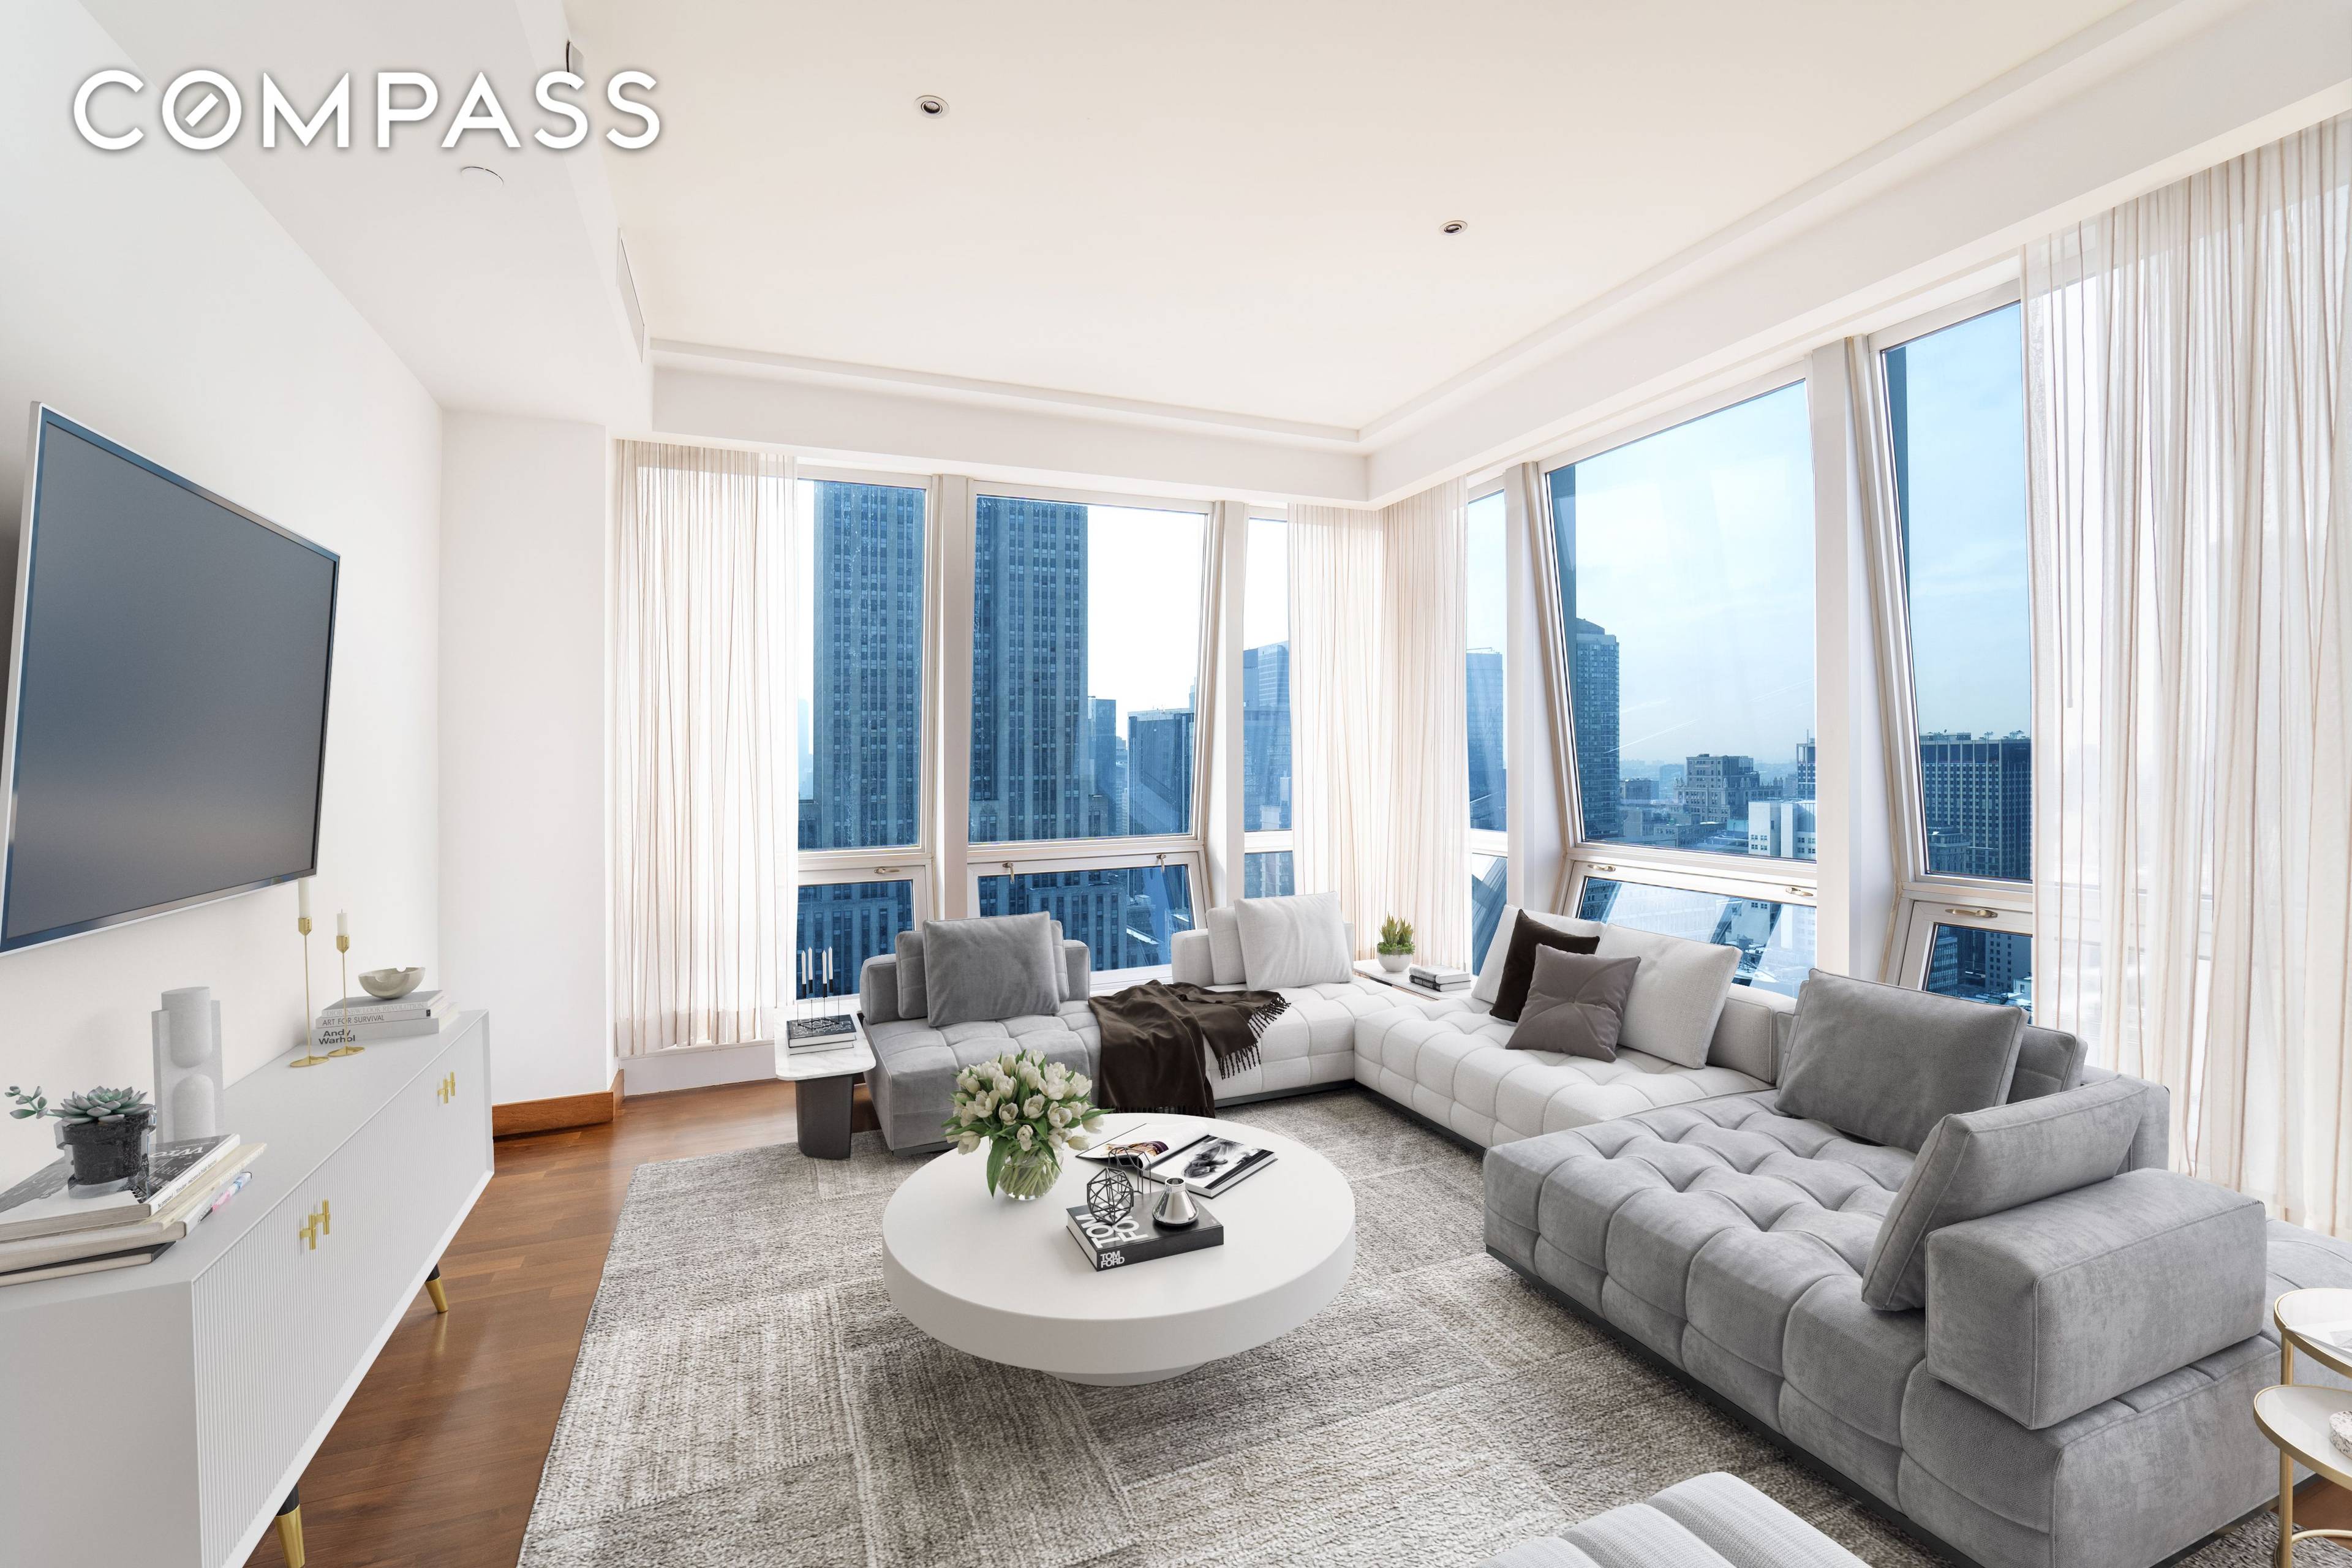 New to Market ! ! Located at the Residences at 400 Fifth Avenue, sitting above the 5 Star Langham Hotel.